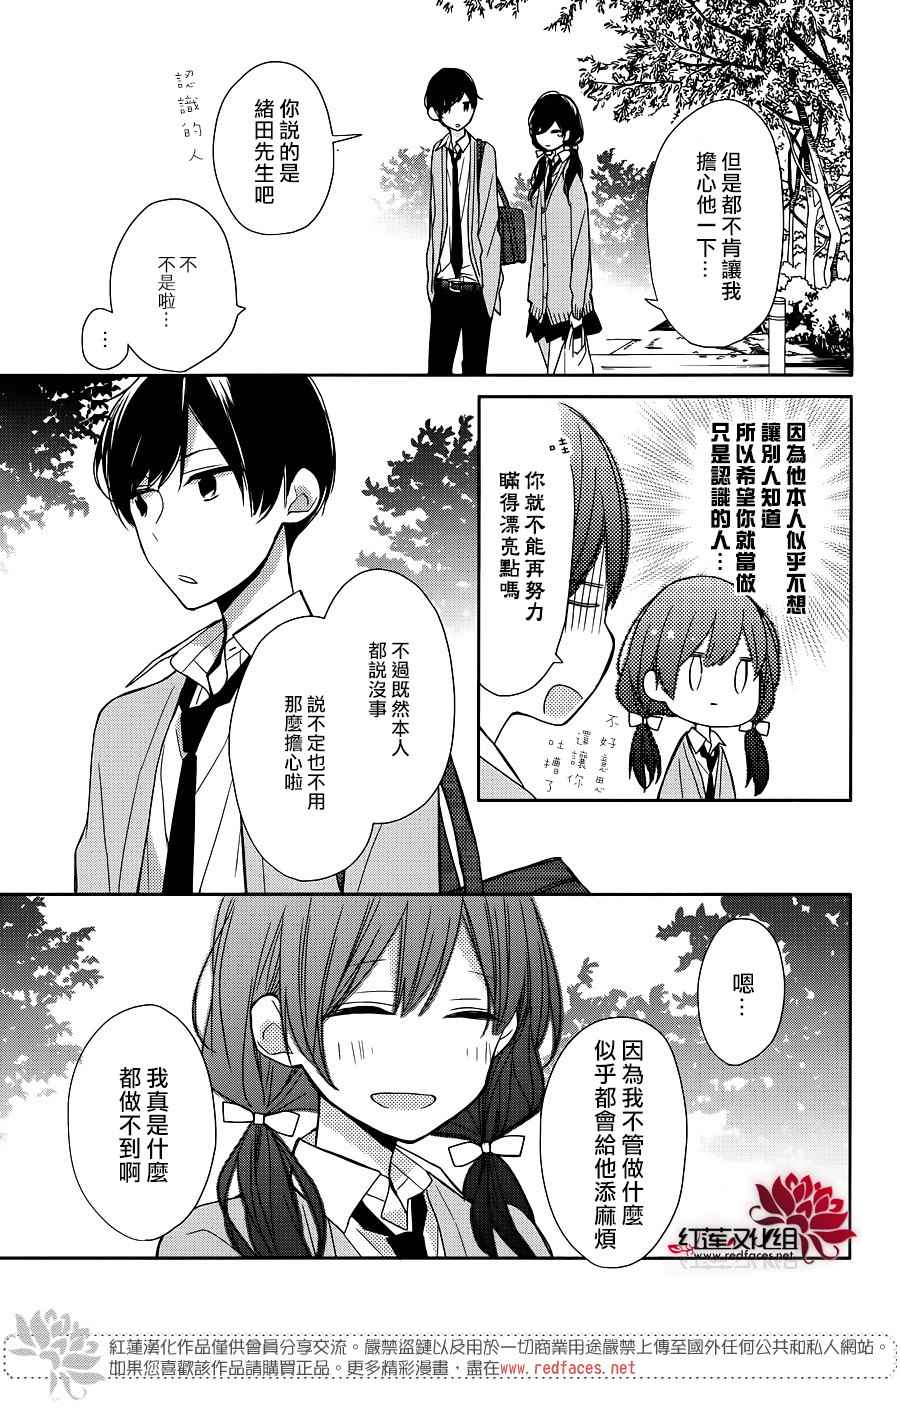 《If given a second chance》漫画 second chance 009话